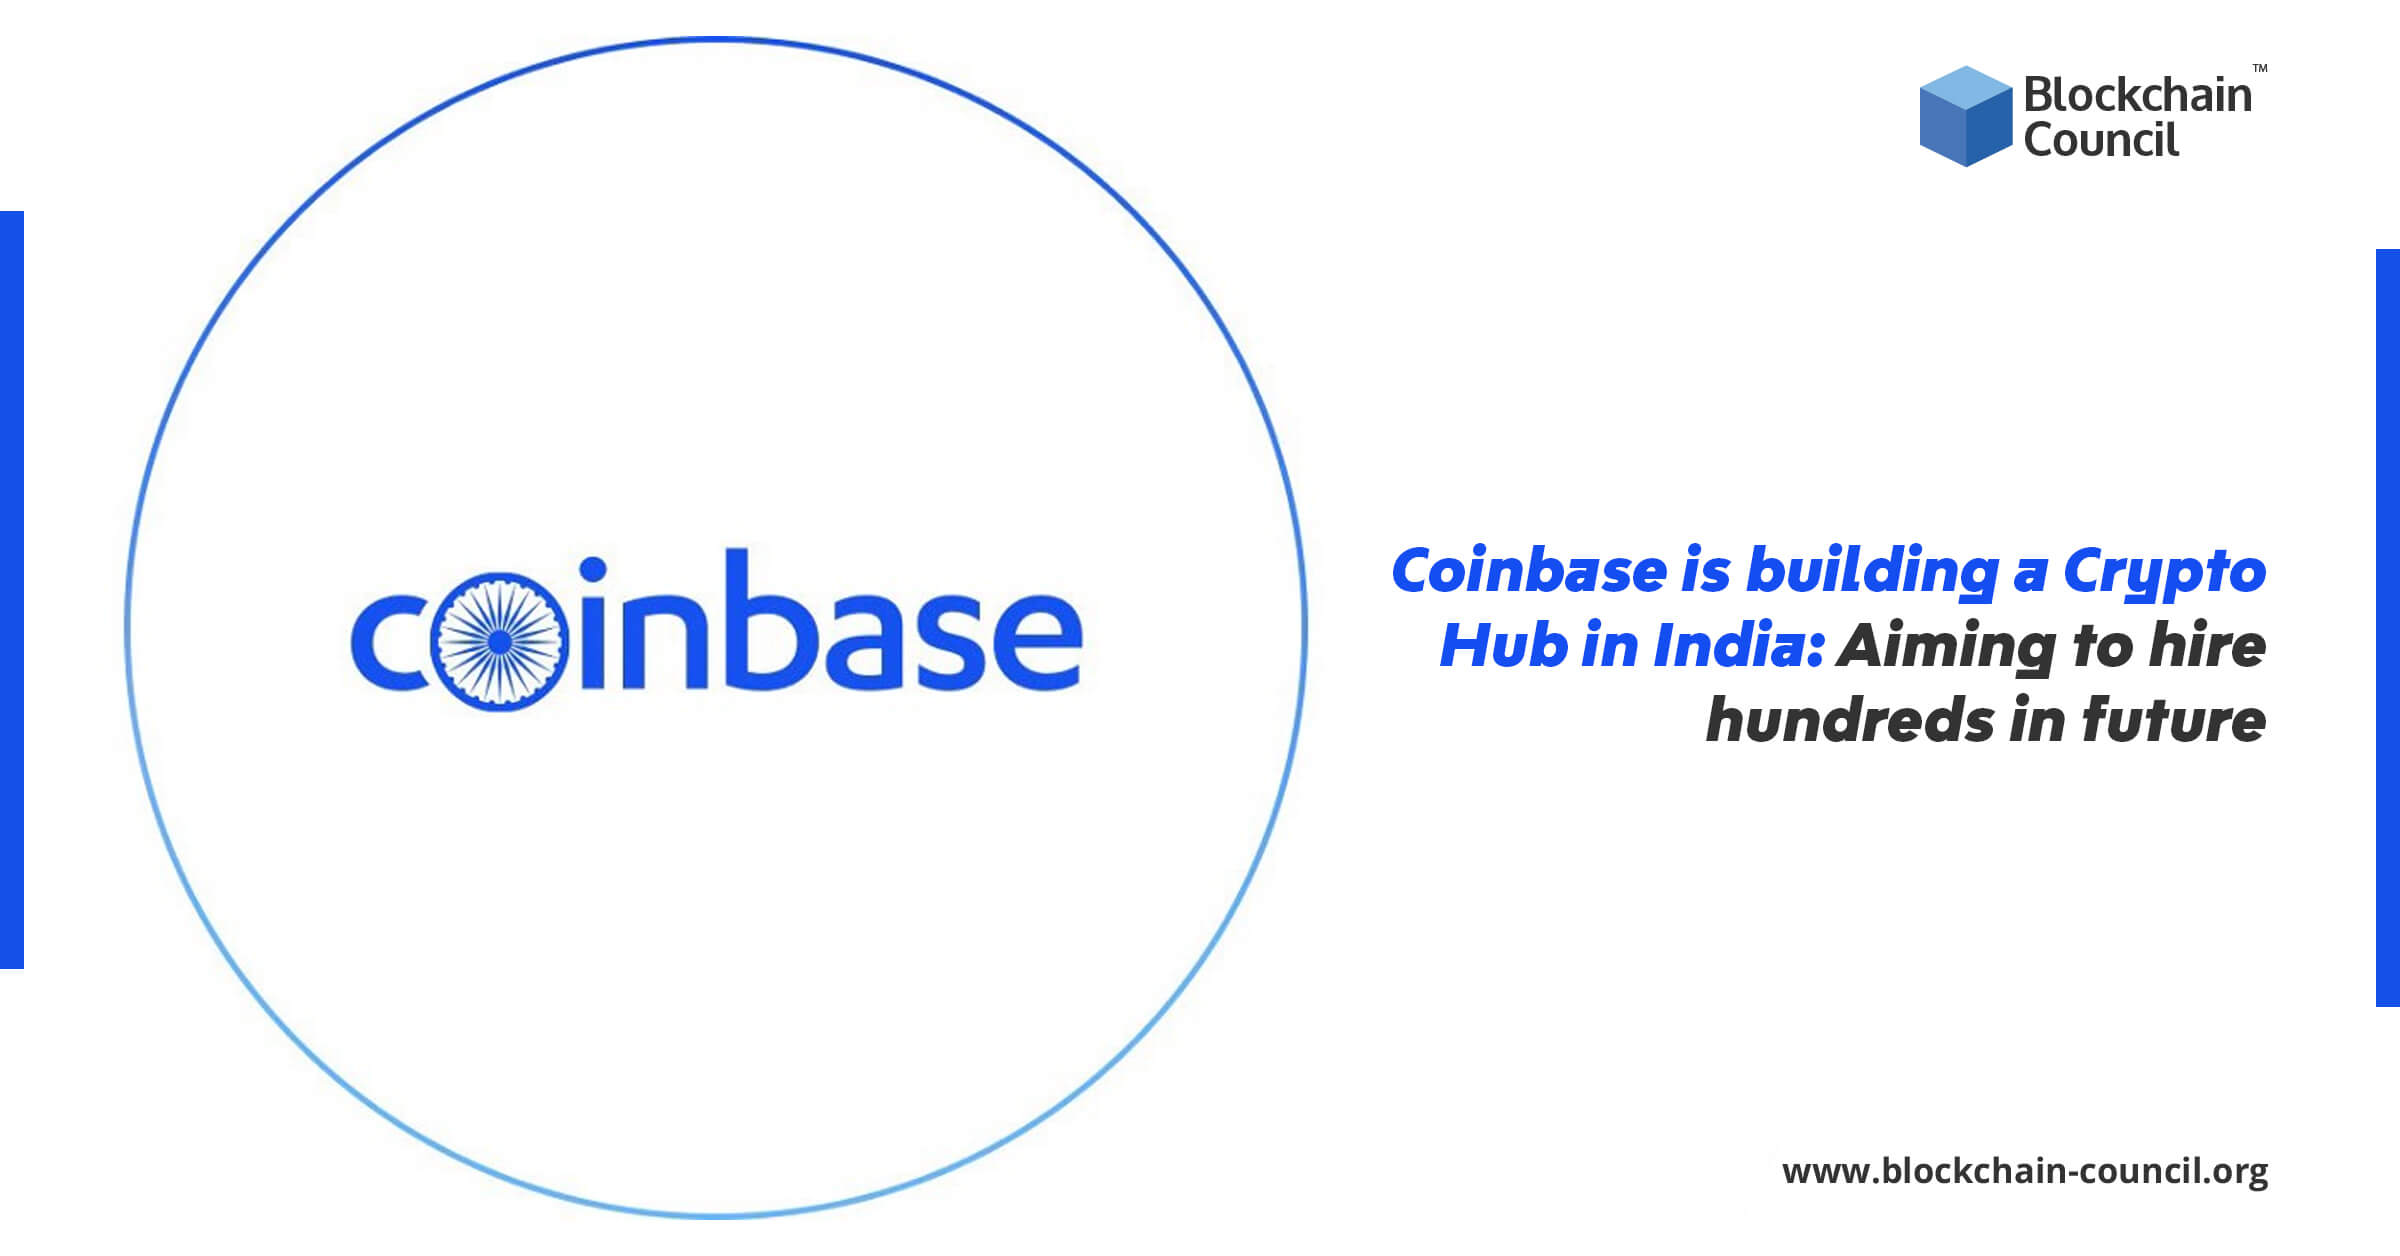 Coinbase is building a Crypto Hub in India: Aiming to hire hundreds in future